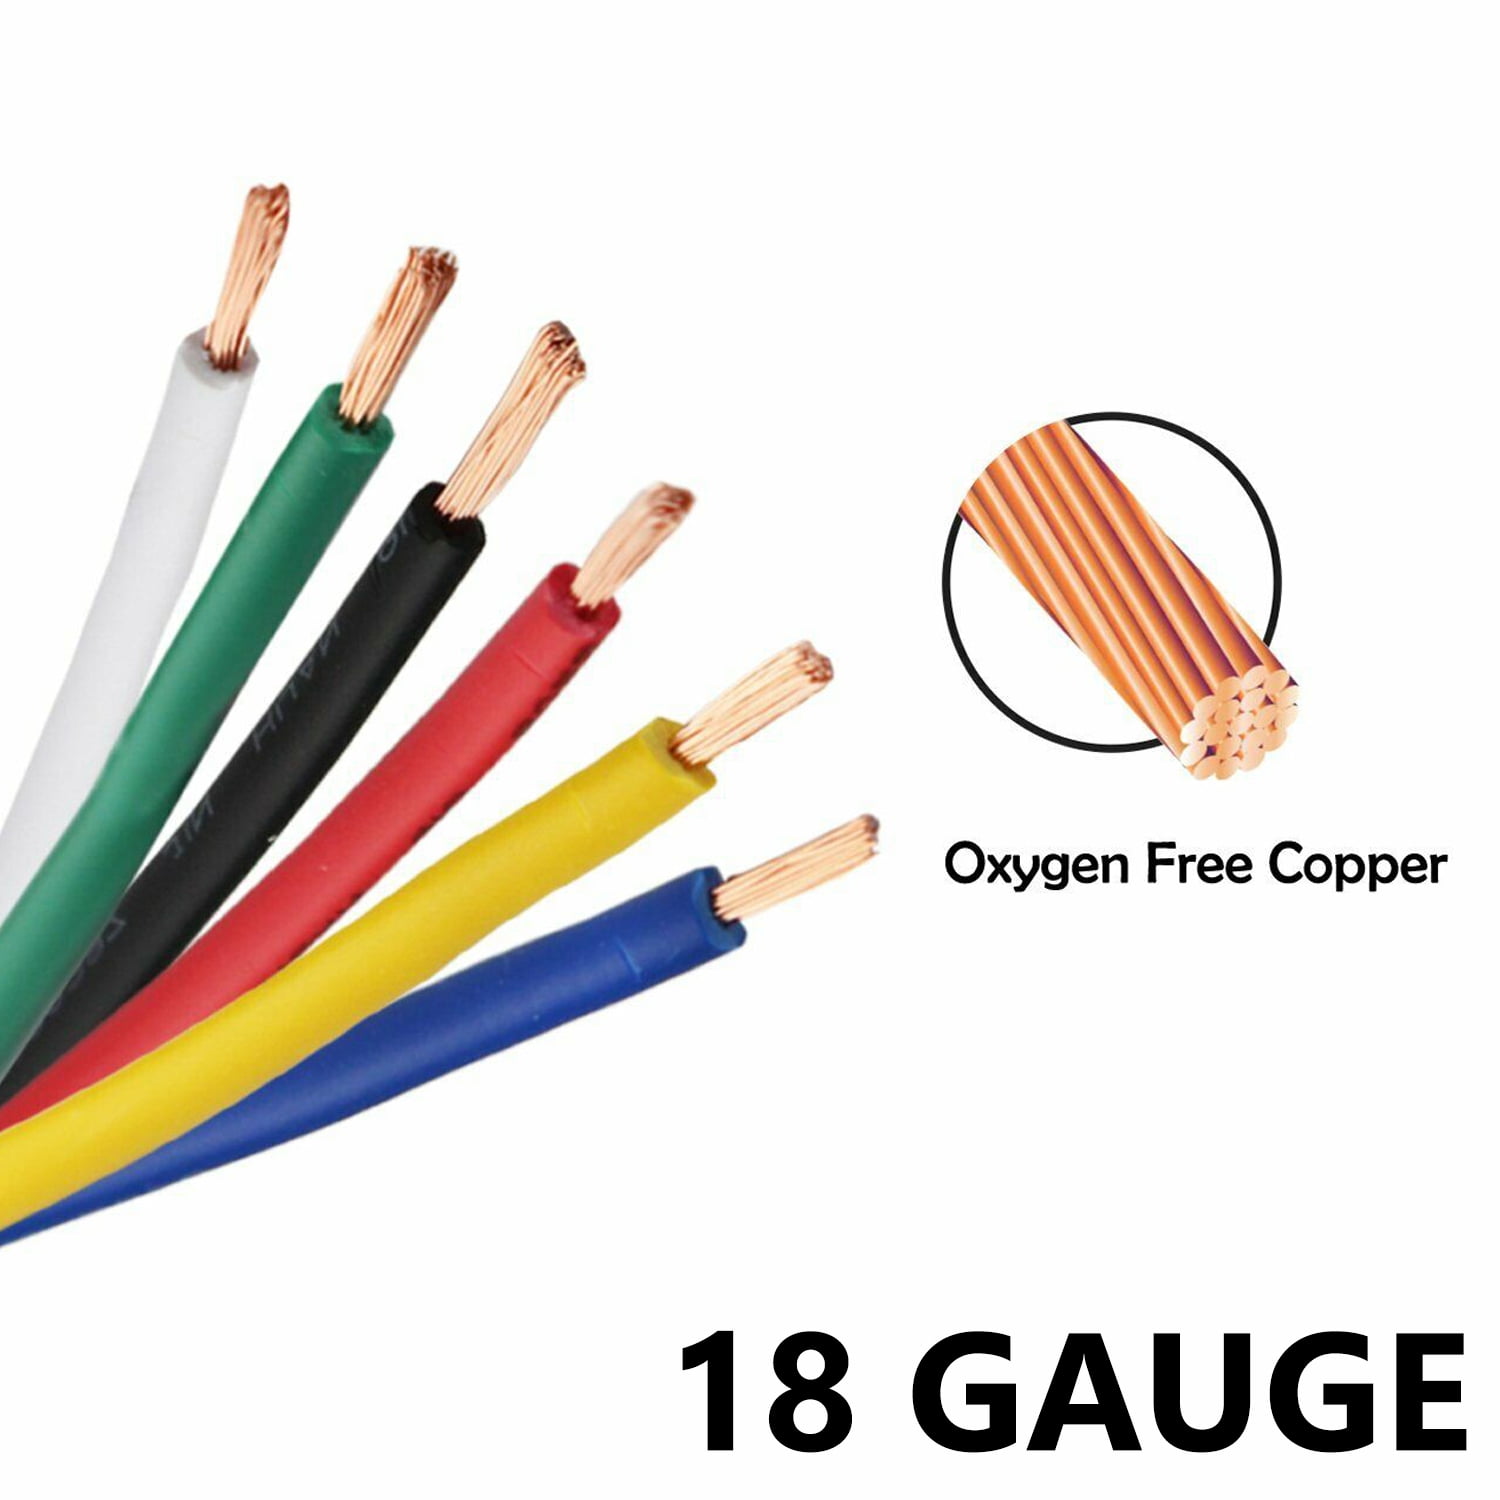 Zestify 18 Gauge Copper Wire - 131 Ft Length | Get Energized and Inspired  Now